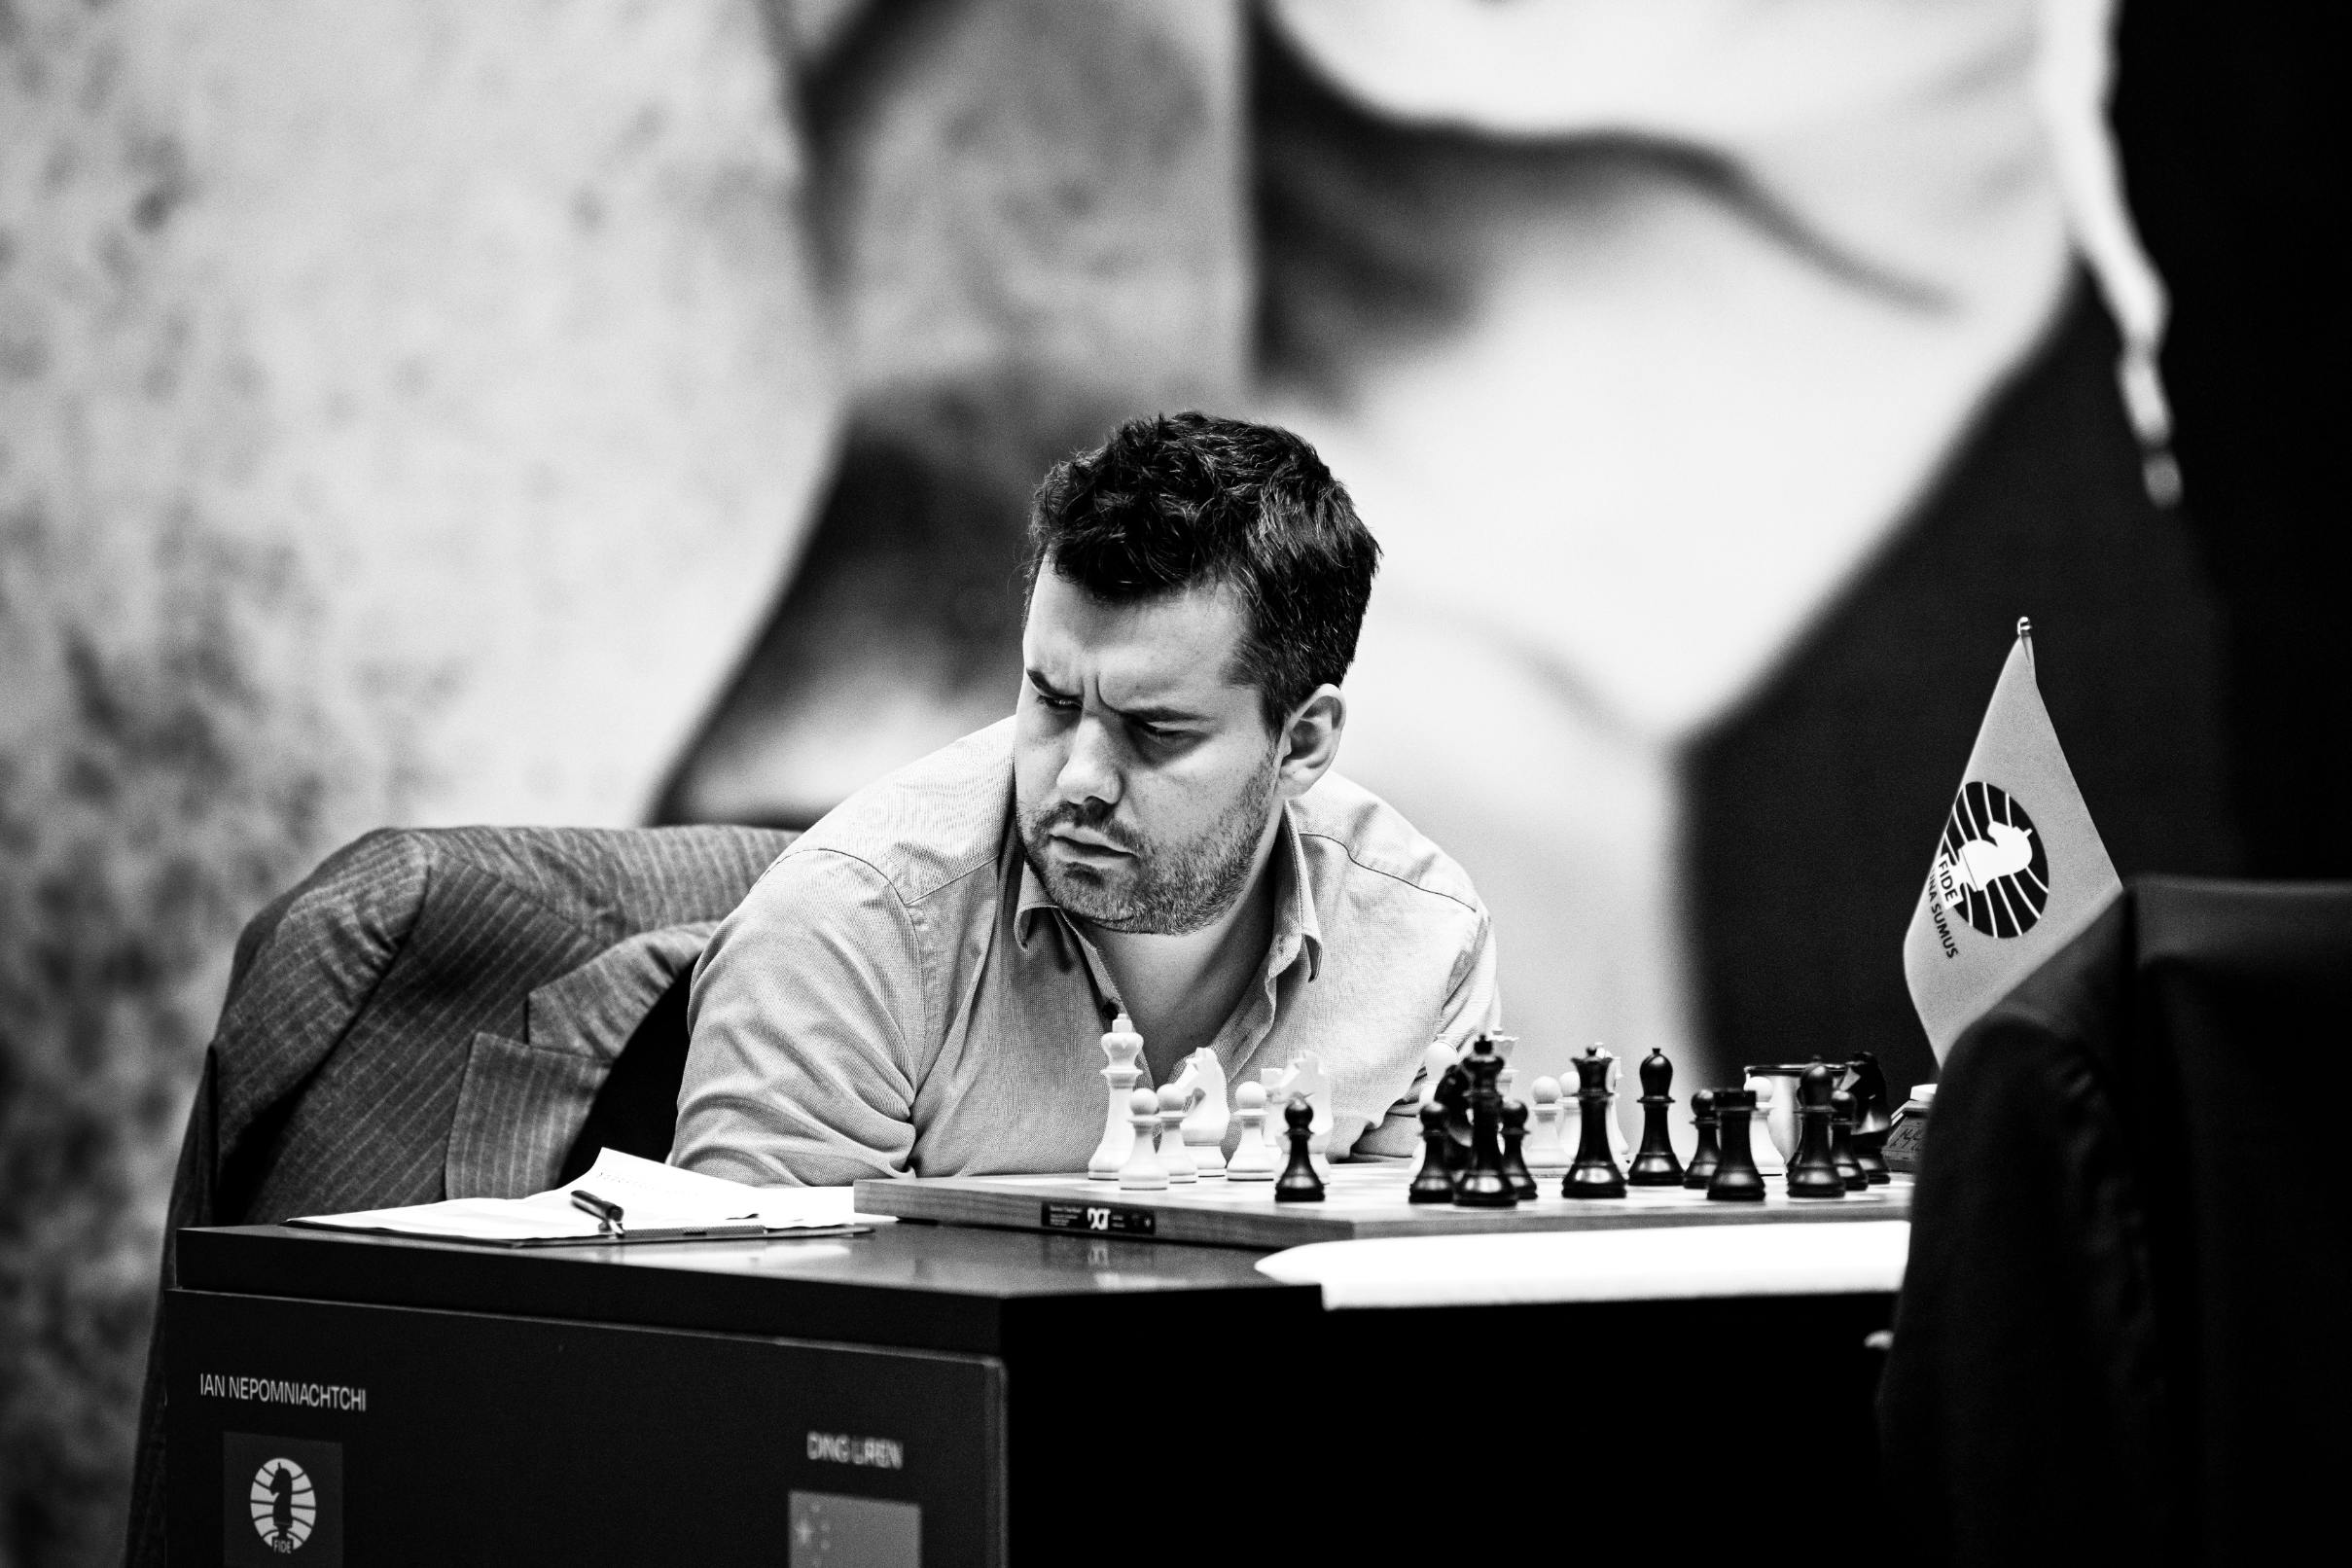 Ding and Nepomniachtchi all-square before final showdown